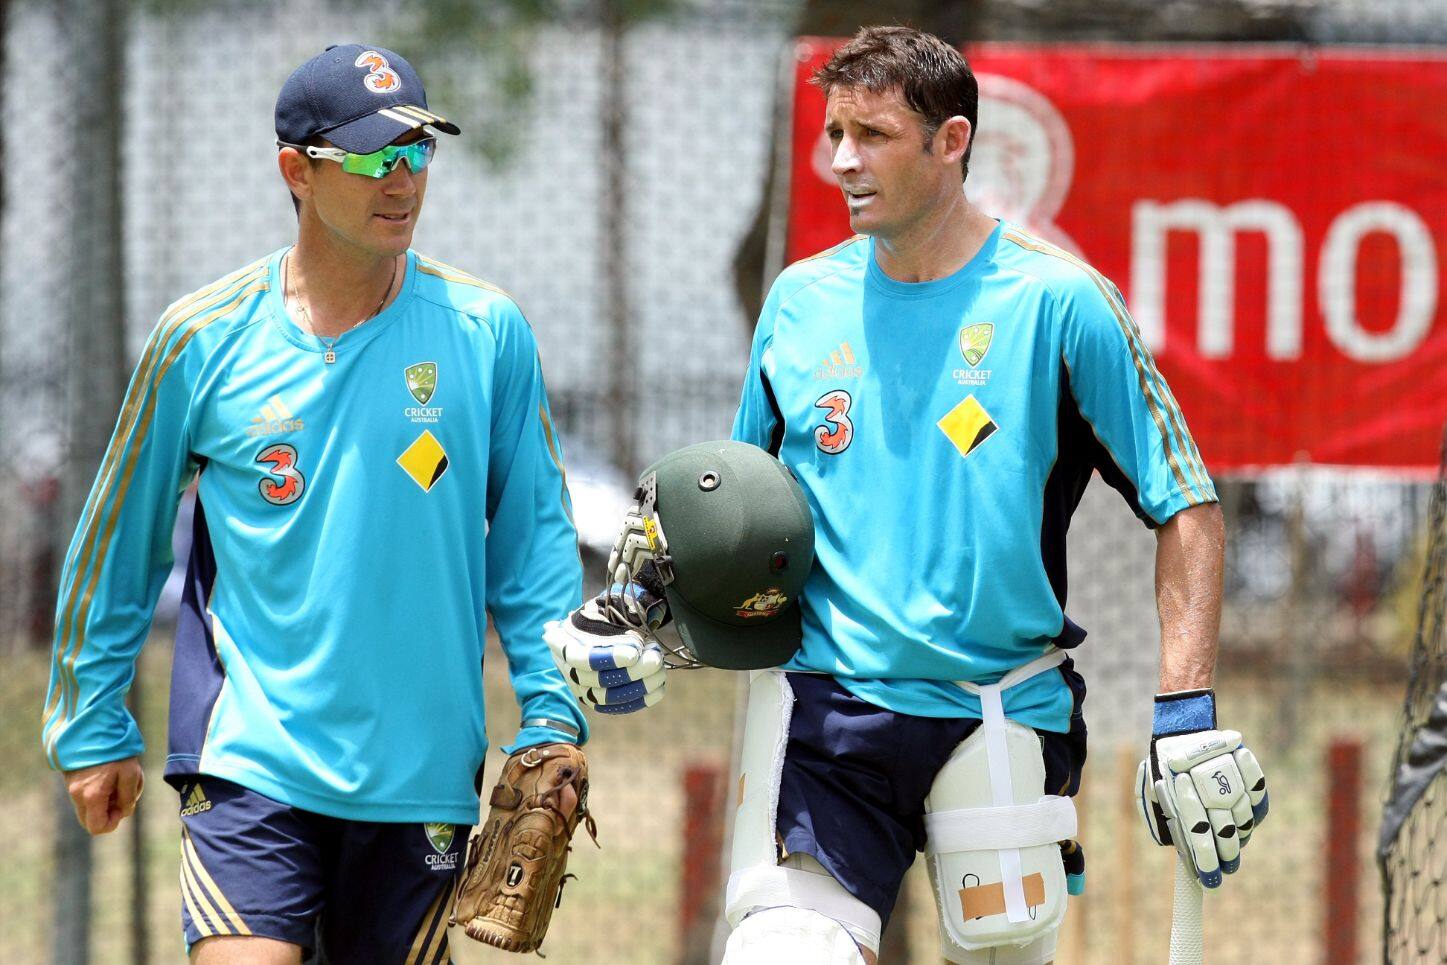 Mike Hussey questions Langers' bombshell comments